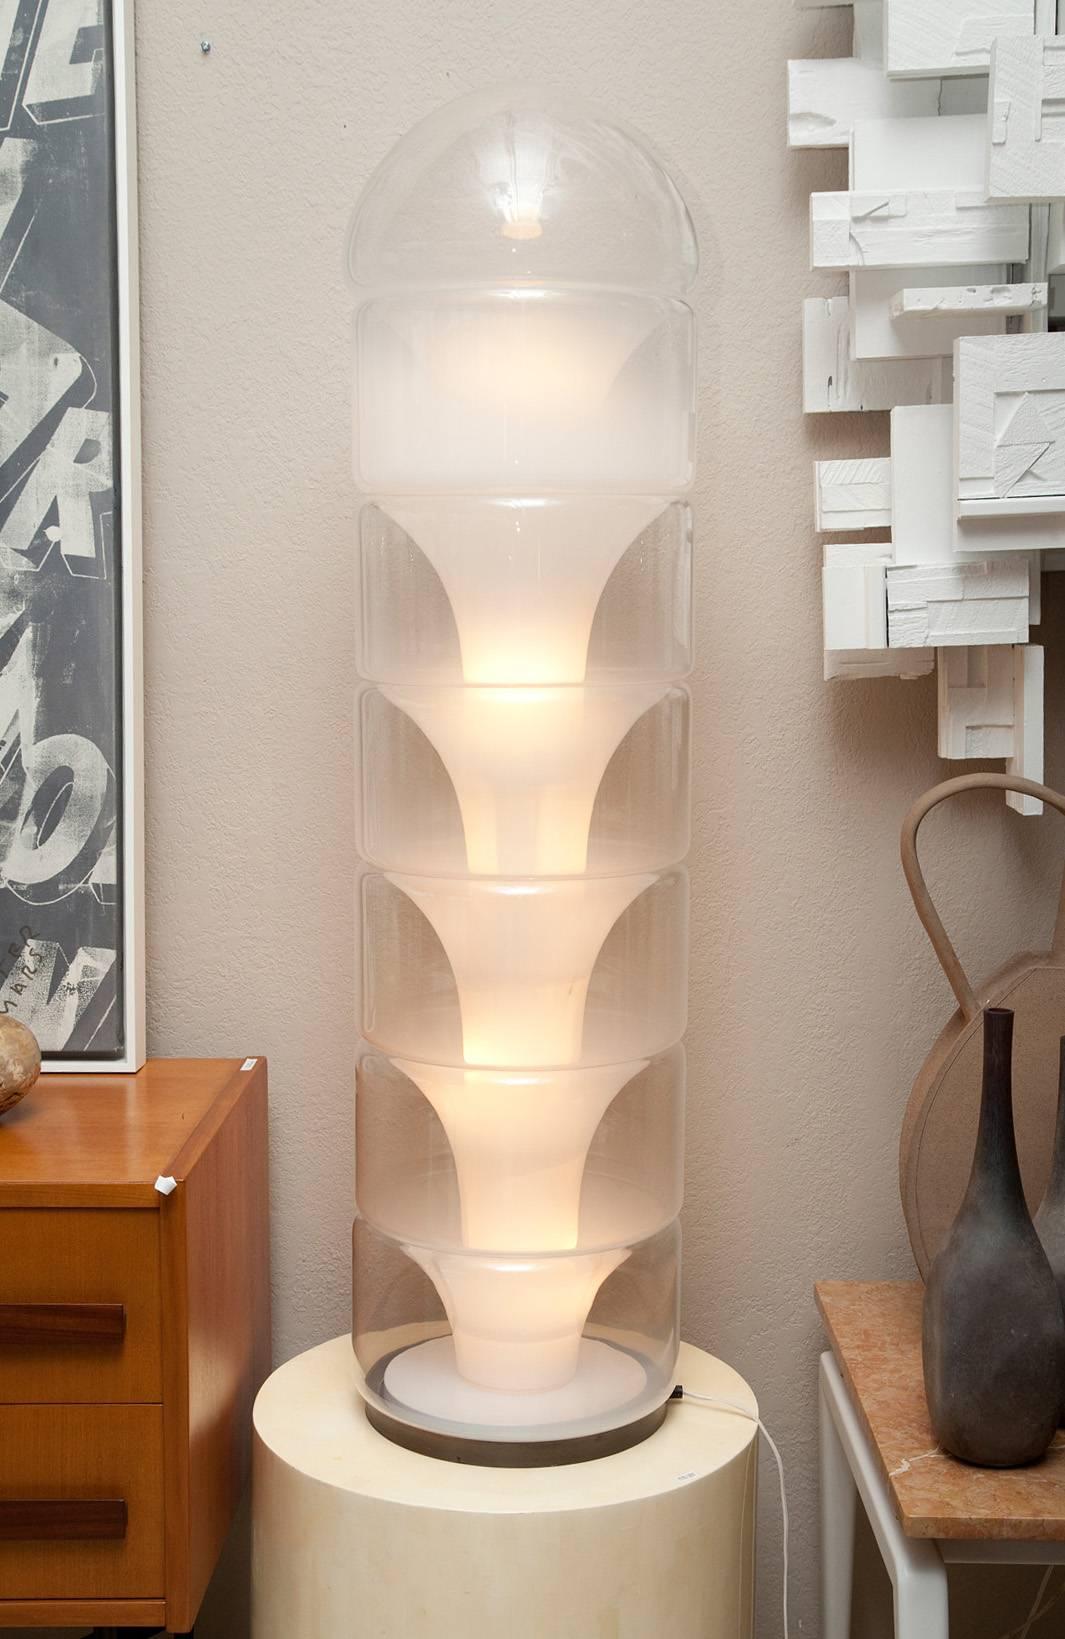 Seven handblown Murano glass elements stack together to create this visually stunning floor lamp designed by Carlo Nason for Mazzegga. Central pillar with six interior lights. Original U.S. wiring.